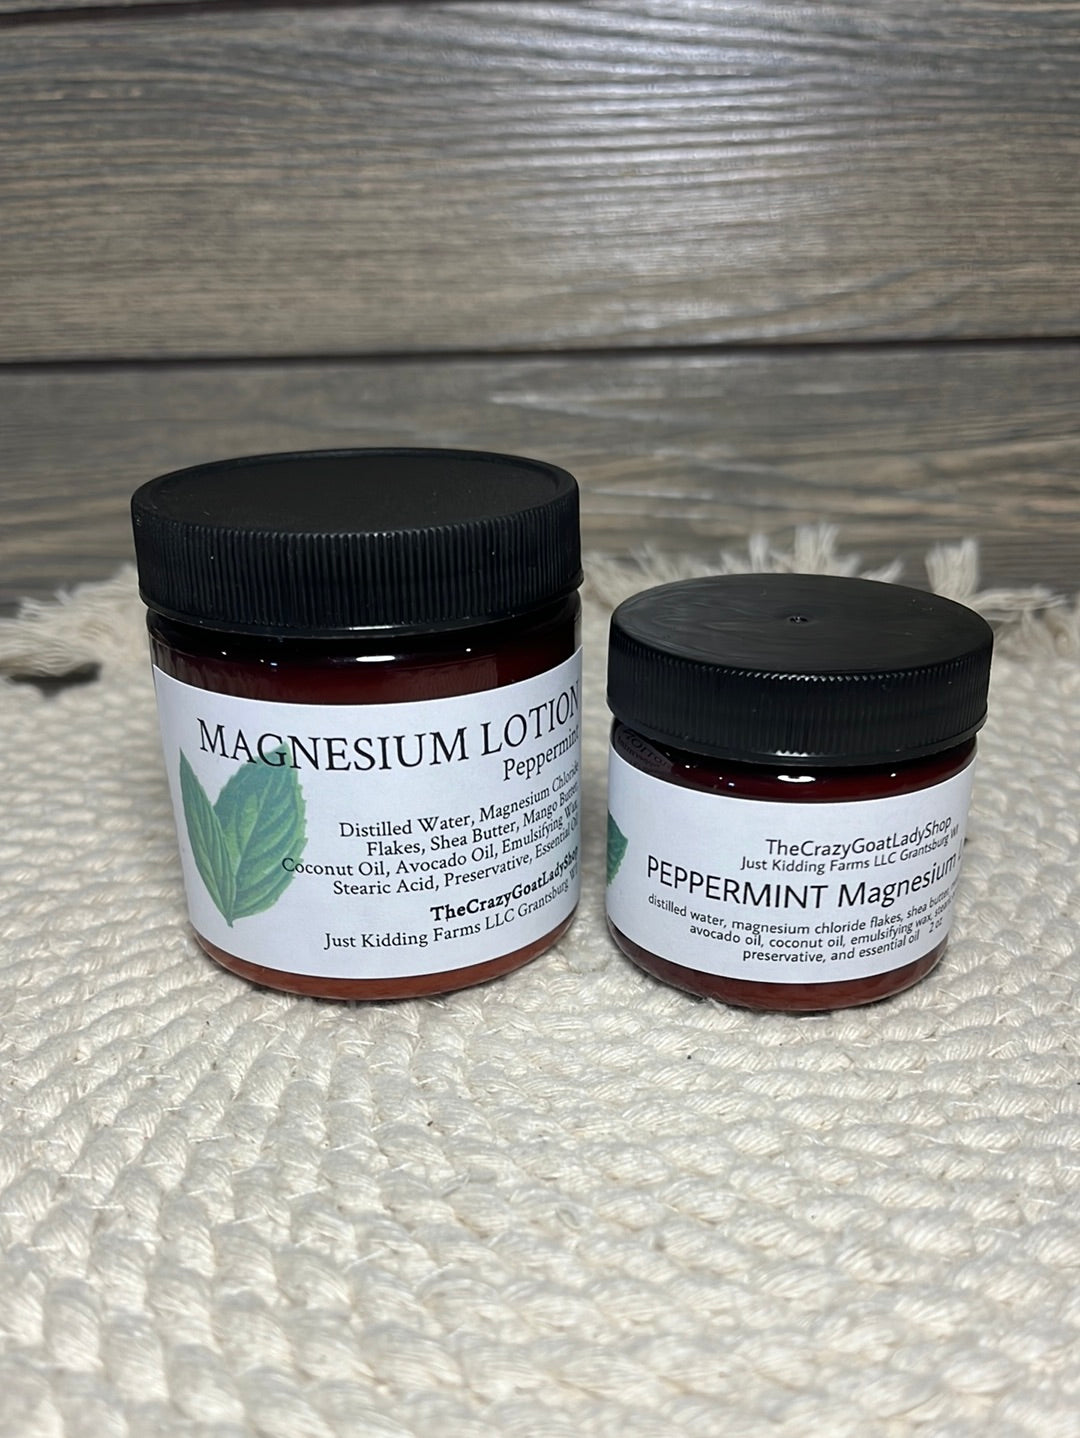 Magnesium Lotion, Peppermint